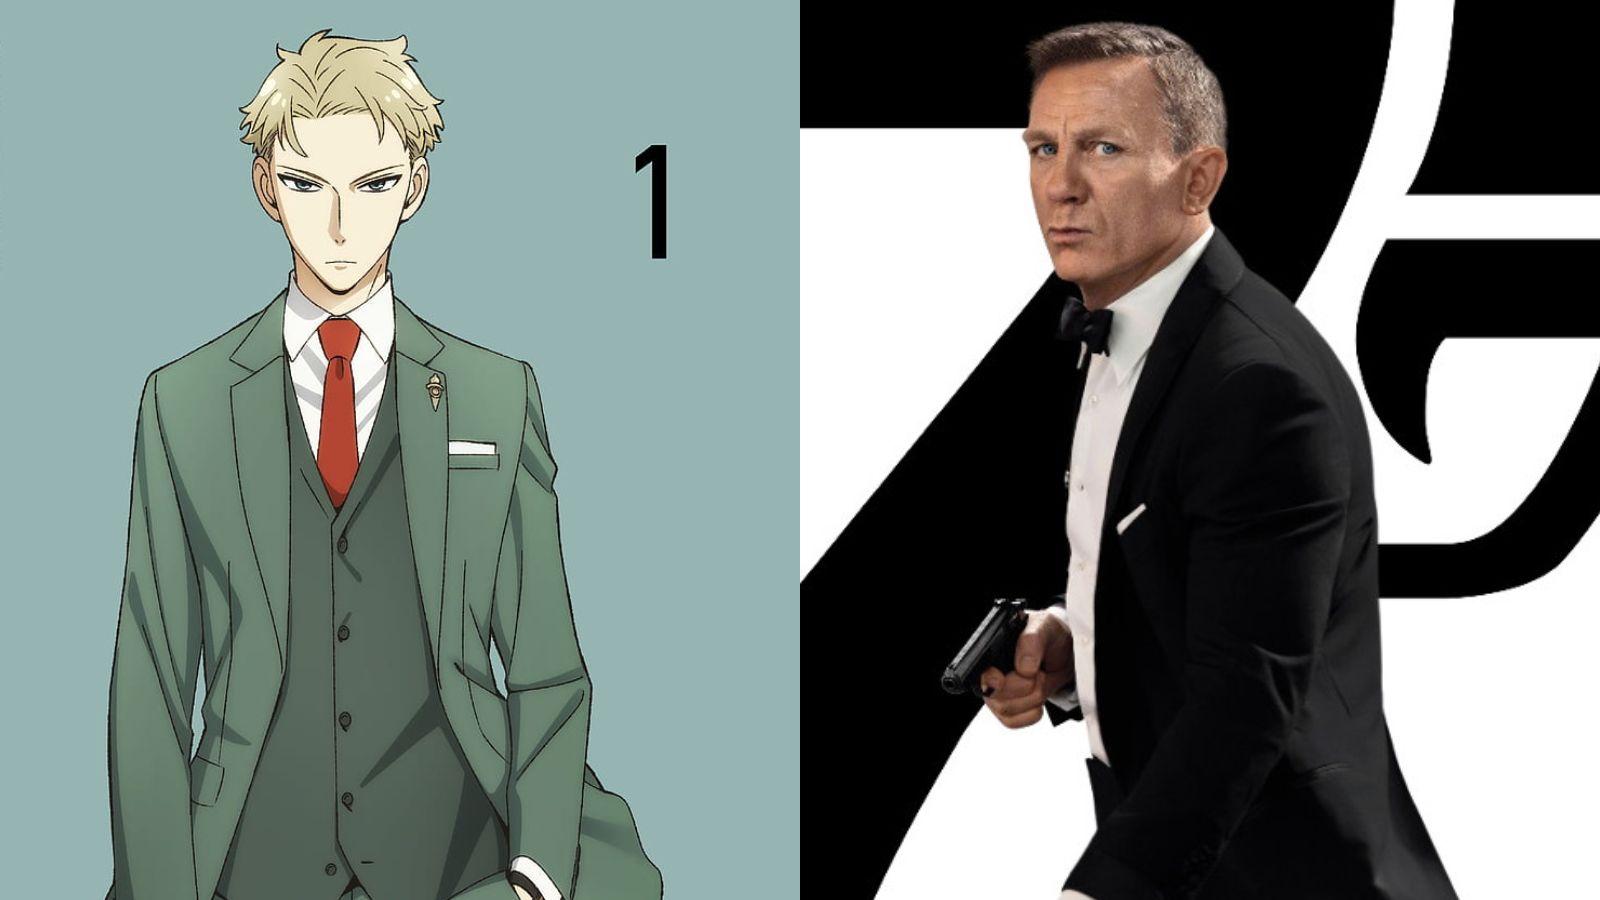 An image of Loid Forger from Spy X Family and James Bond